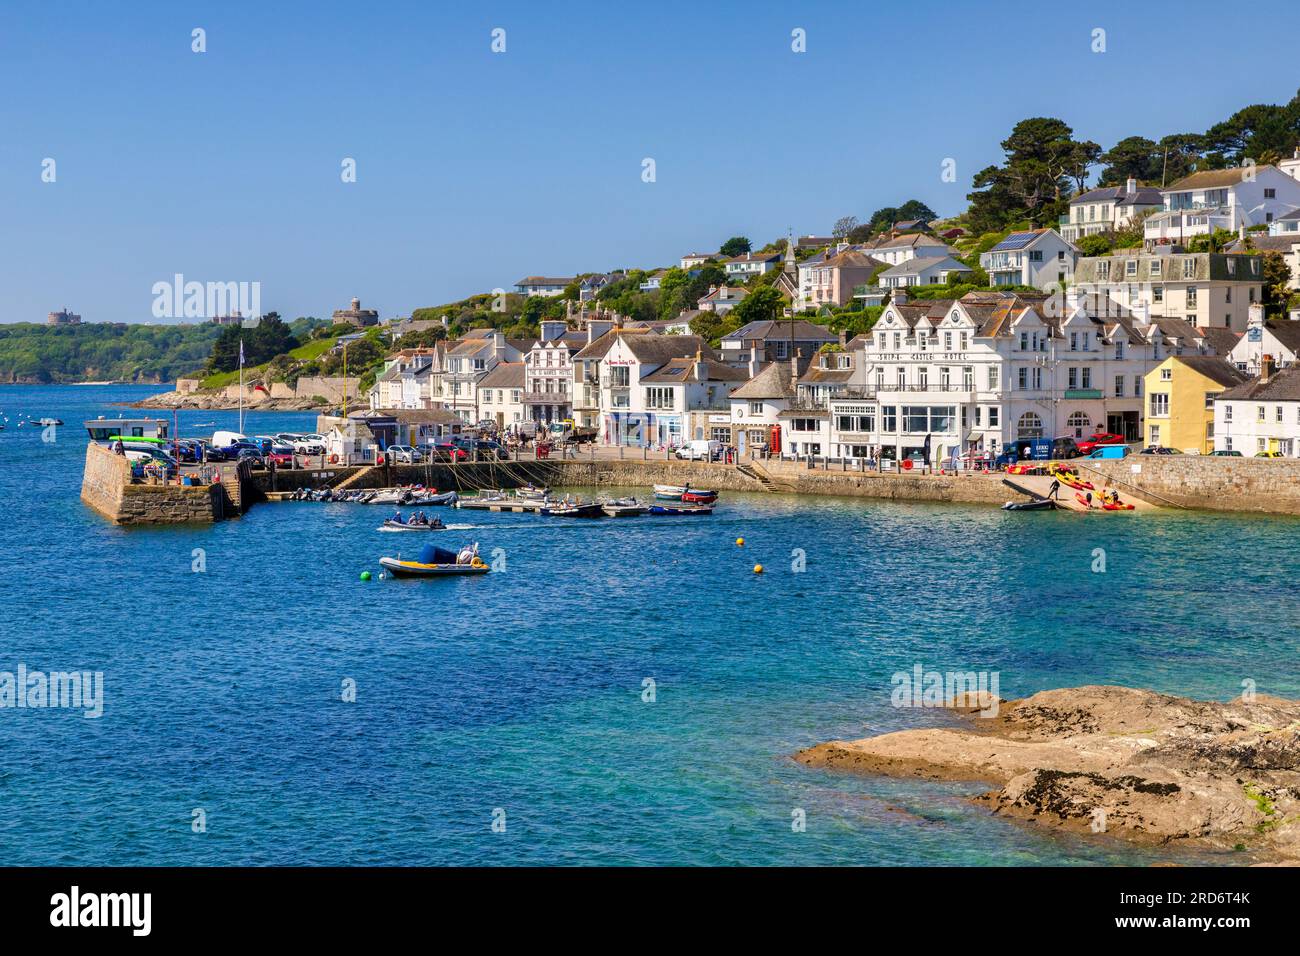 26 May 2023: St Mawes, Roseland Peninsula, Cornwall, UK - The popular village of St Mawes. St Mawes Castle can be seen, and also the similar one acros Stock Photo